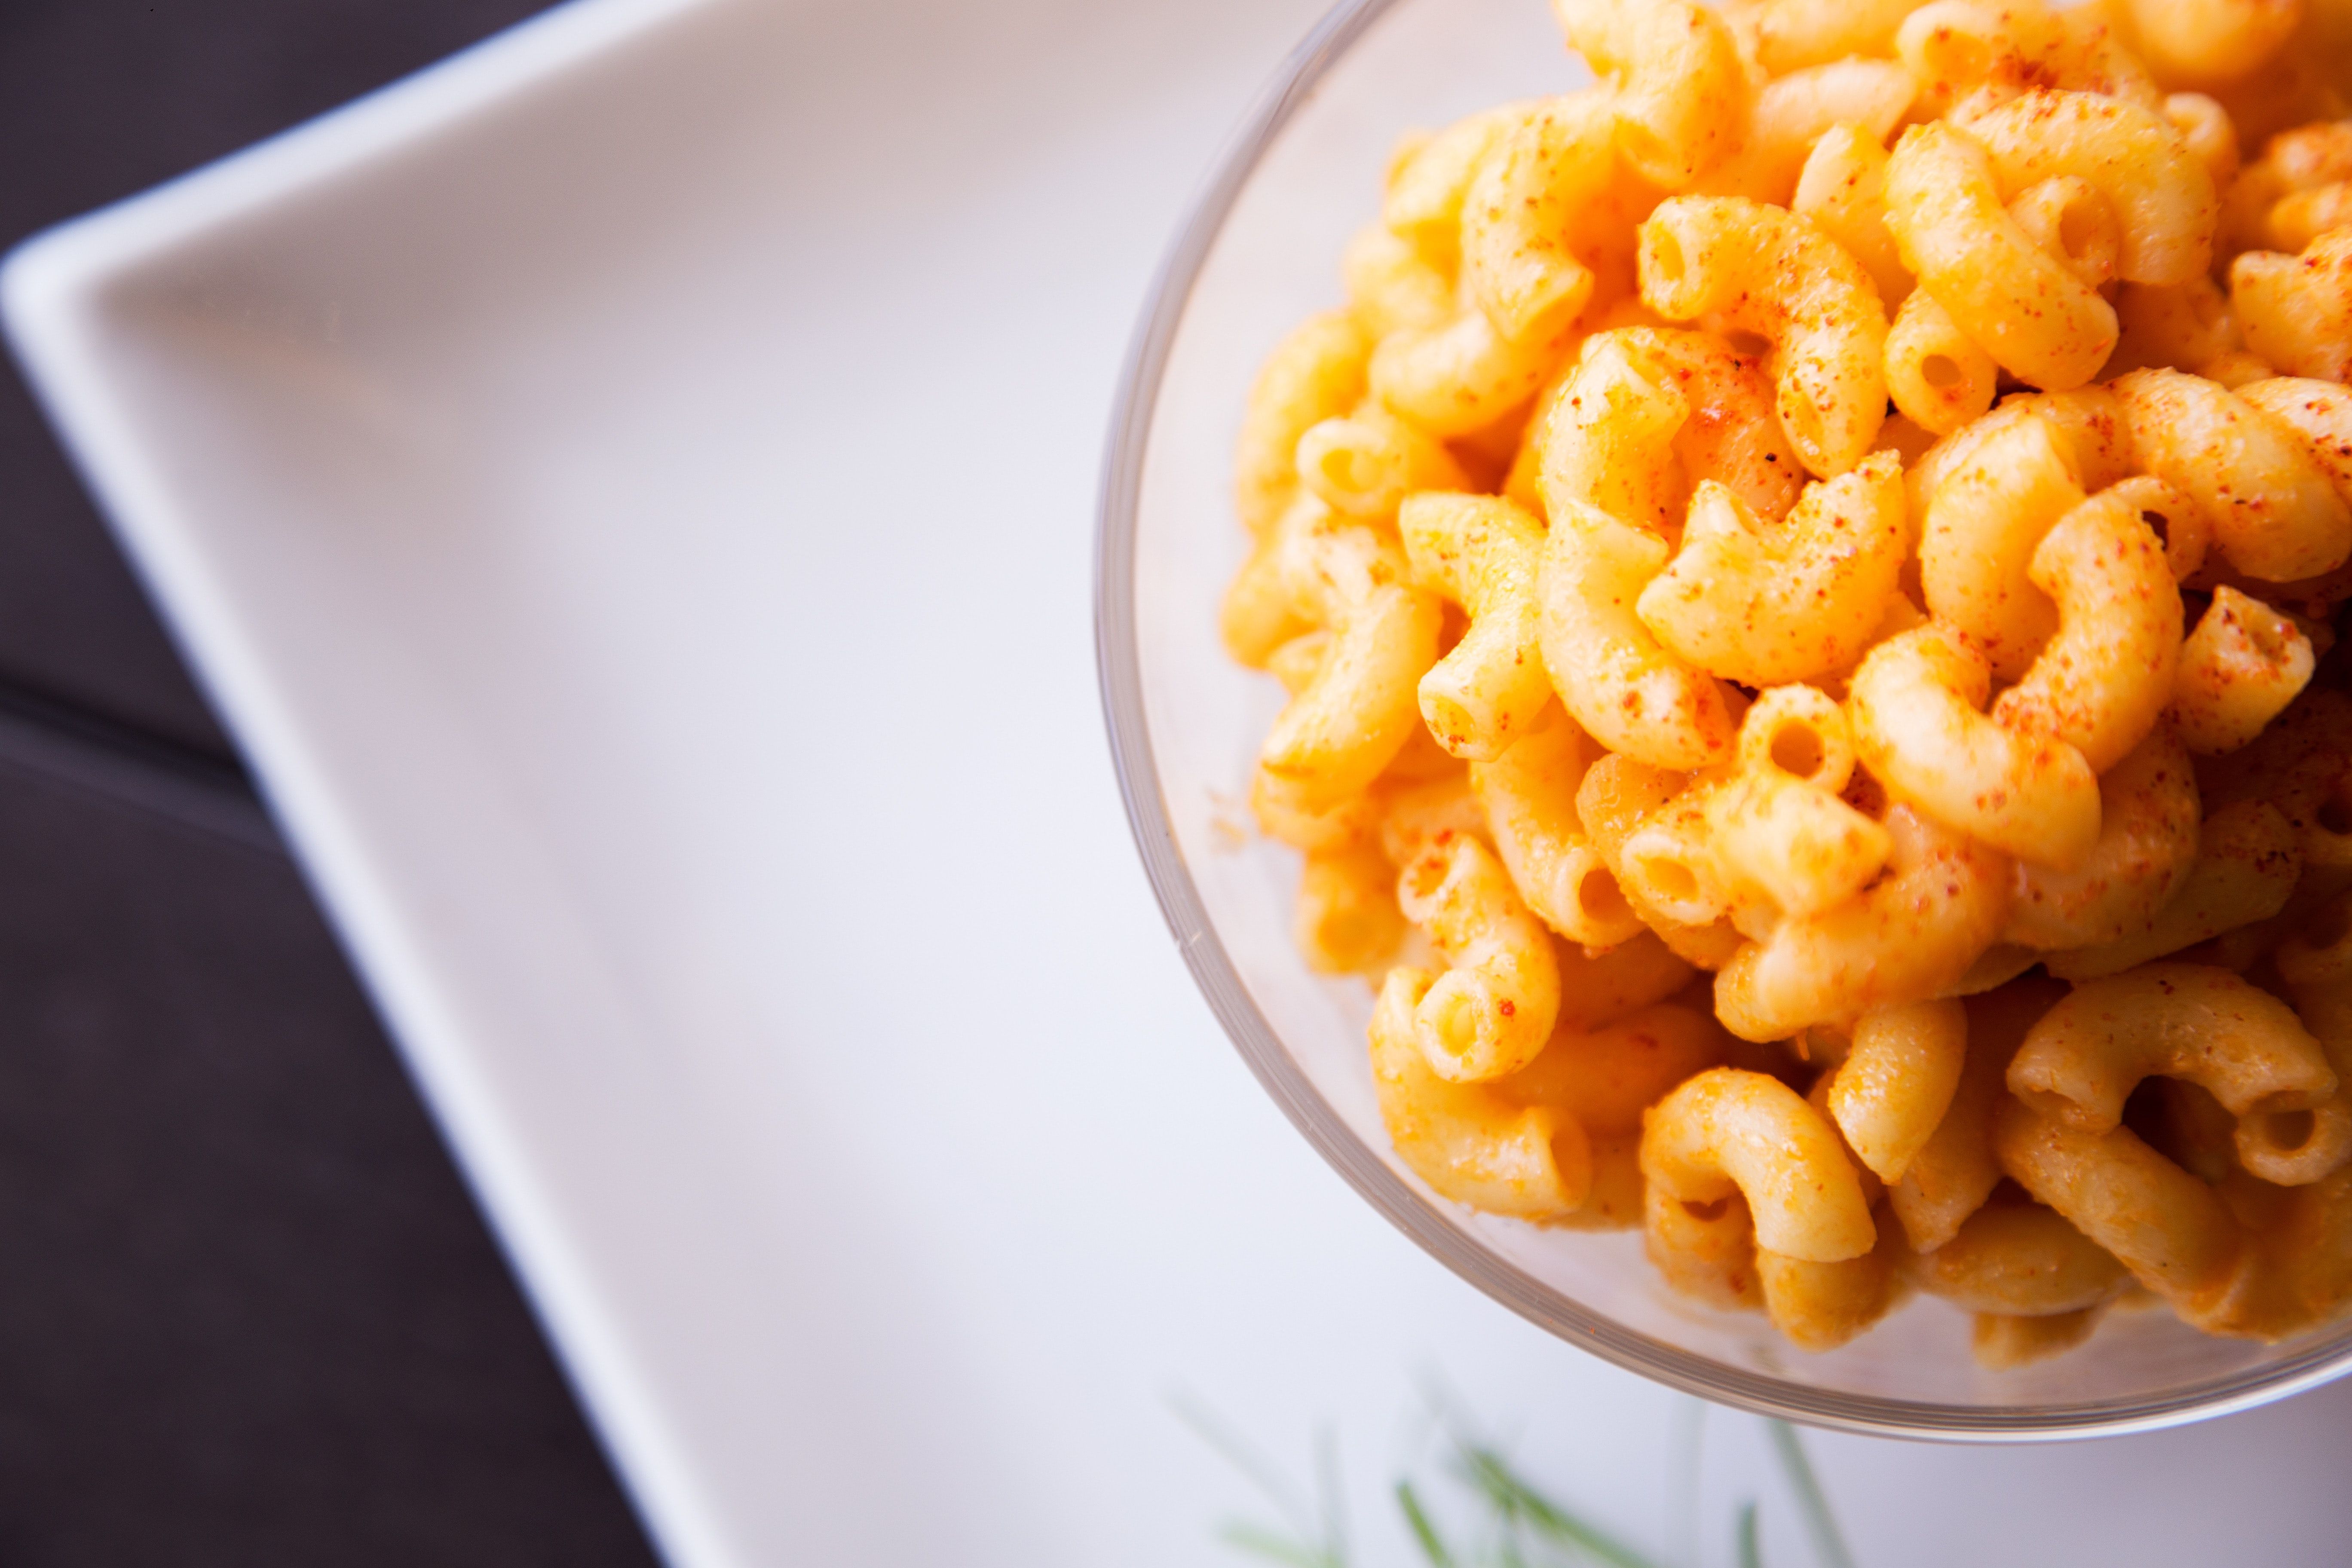 Macaroni And Cheese Picture. Download Free Image